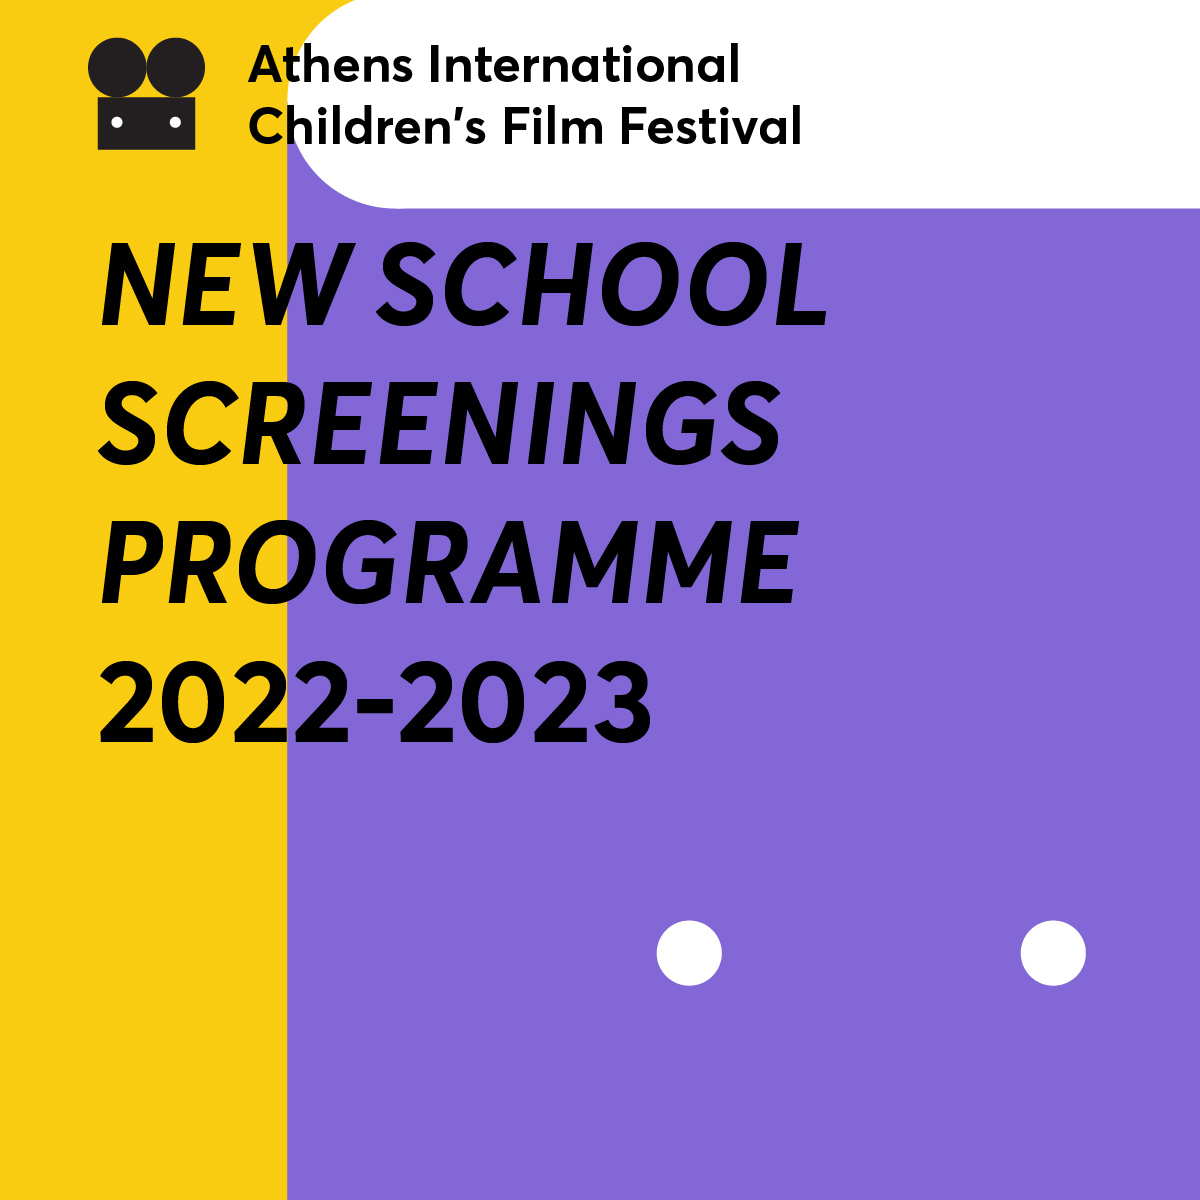 The new School Screenings Programme for the academic year of 2022-2023 is here!